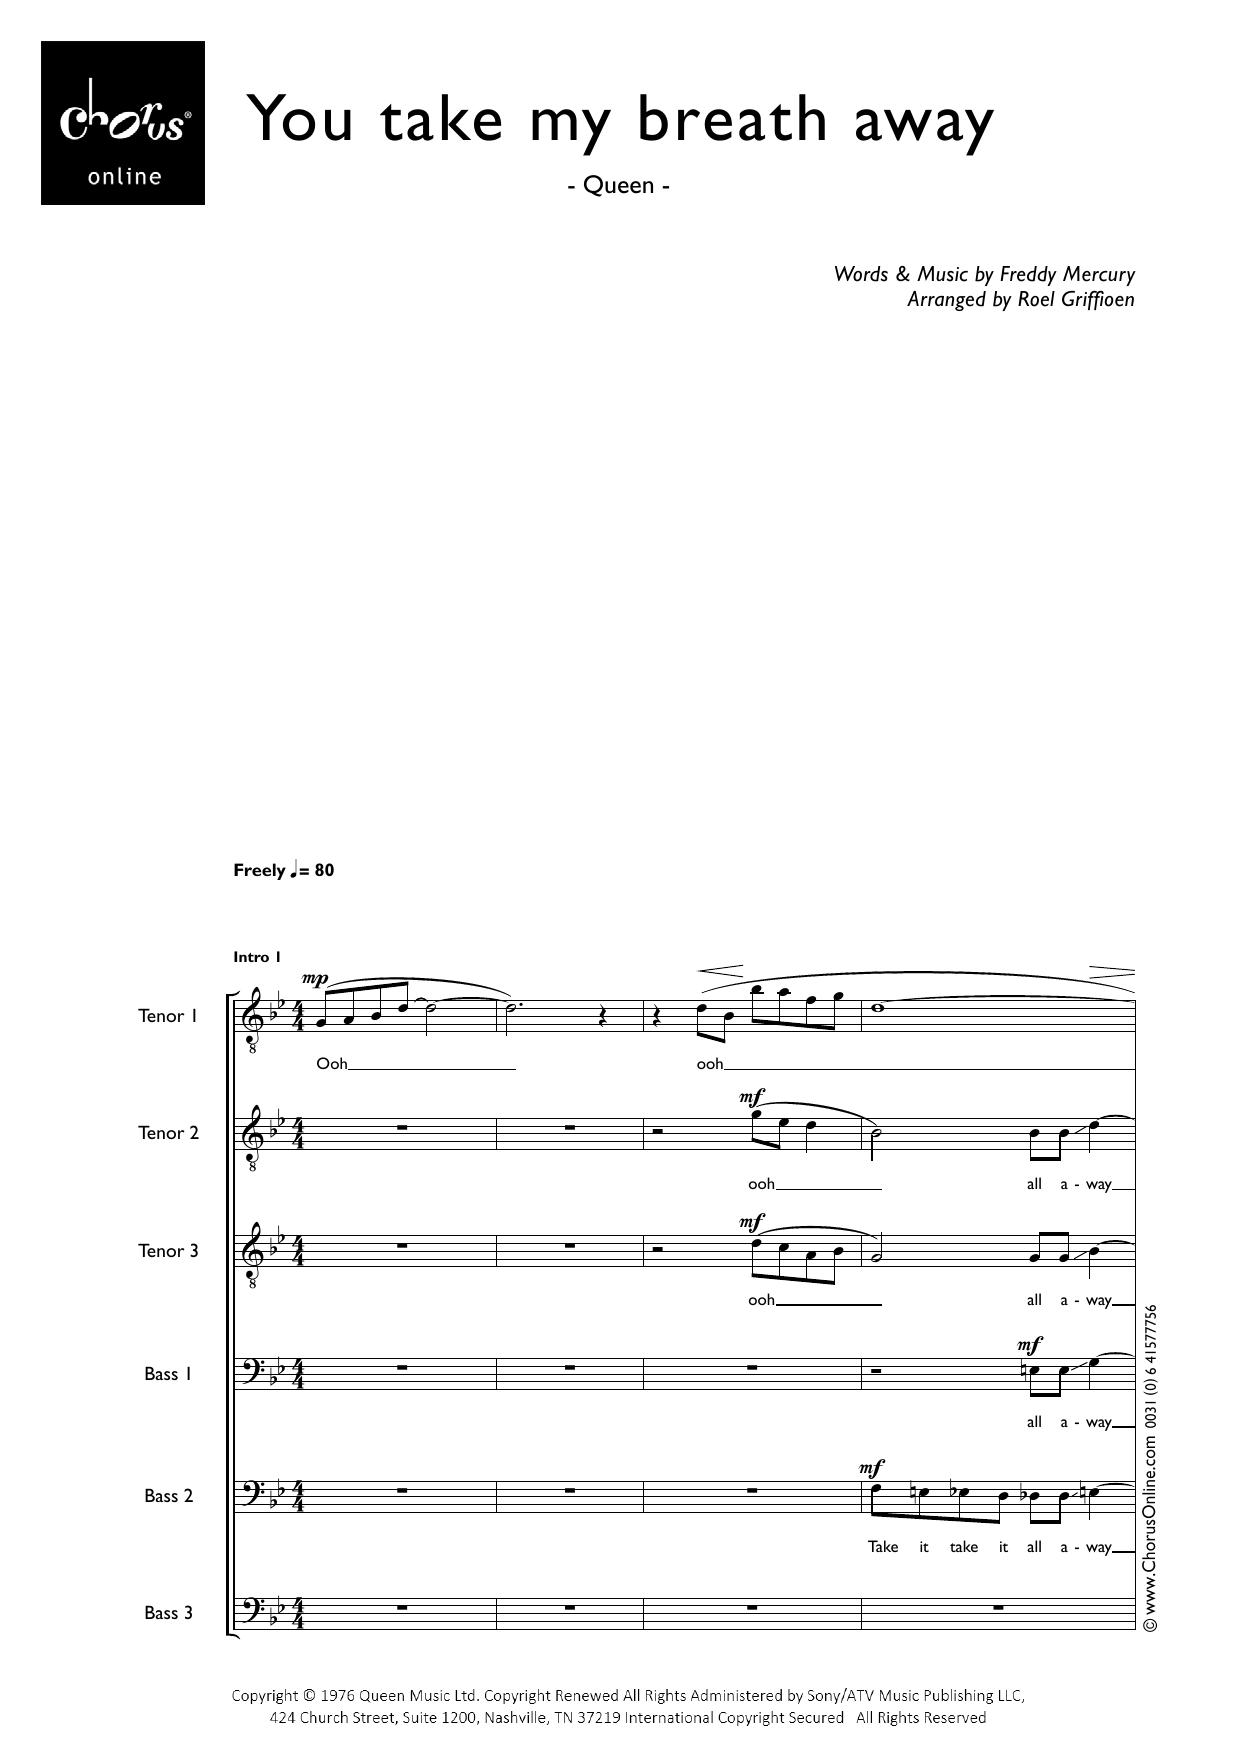 Queen You Take My Breath Away (arr. Roel Griffioen) sheet music notes printable PDF score